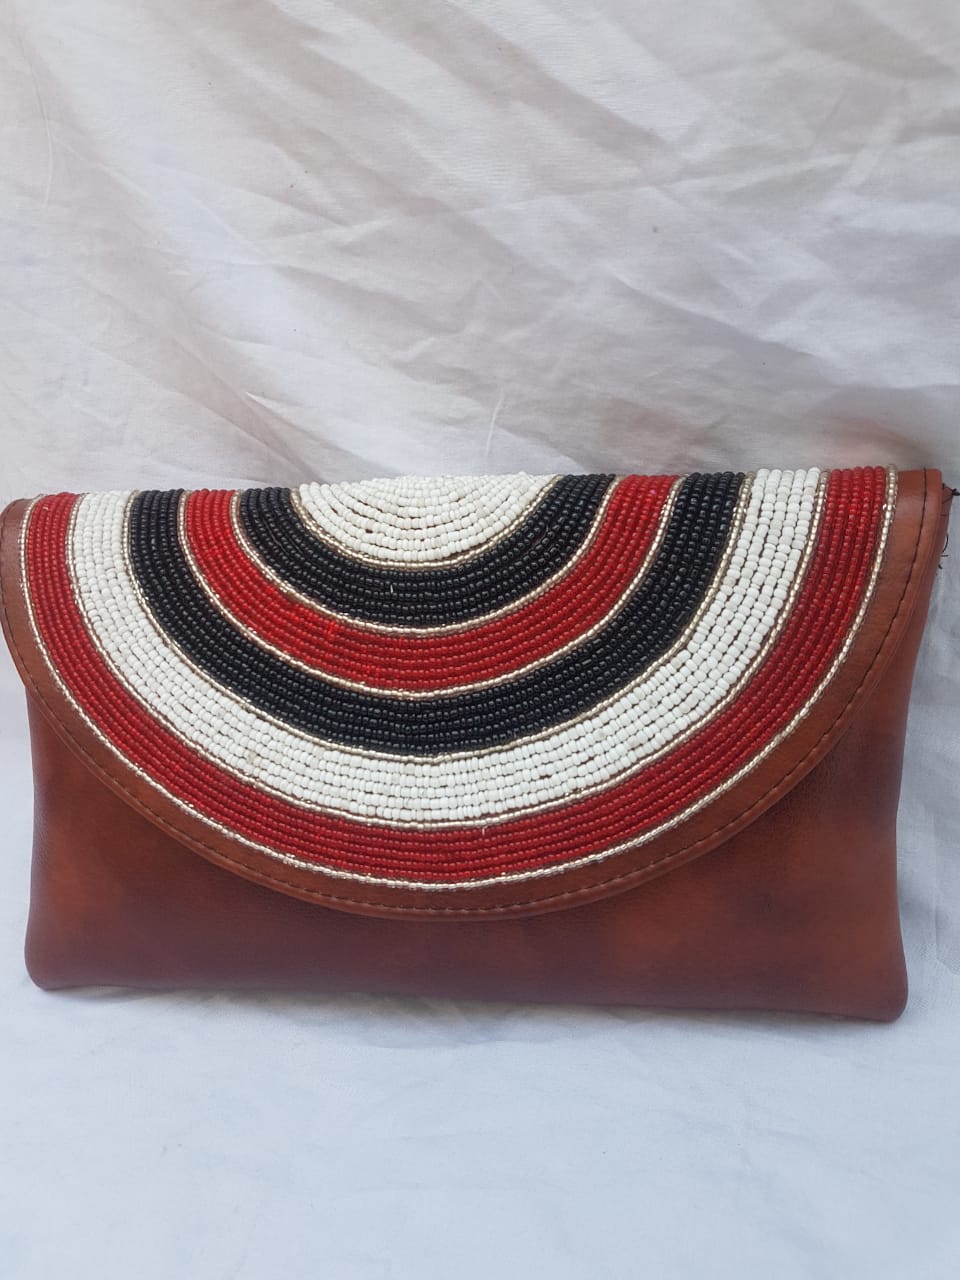 Leather clutch purse decorated with colorful beads.